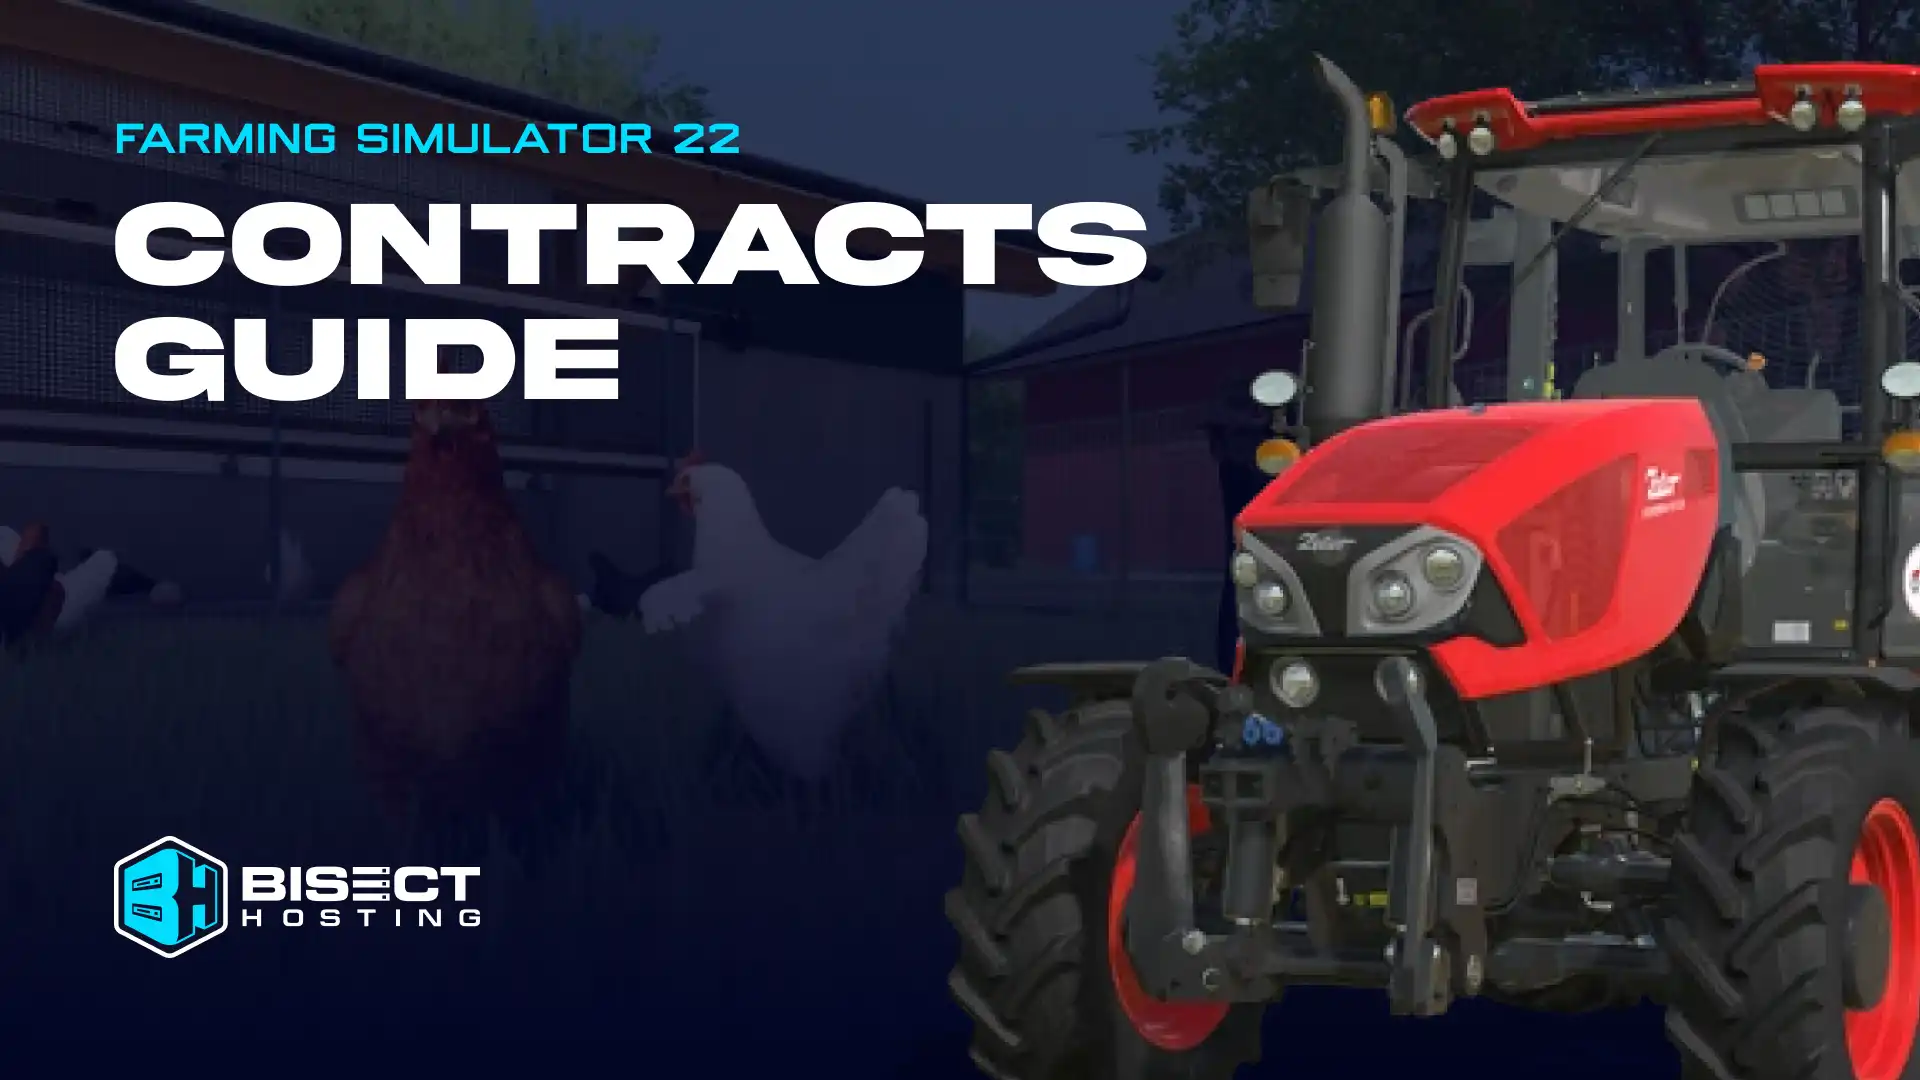 Farming Simulator 2022 Contracts: How To Complete Tasks and Get Paid